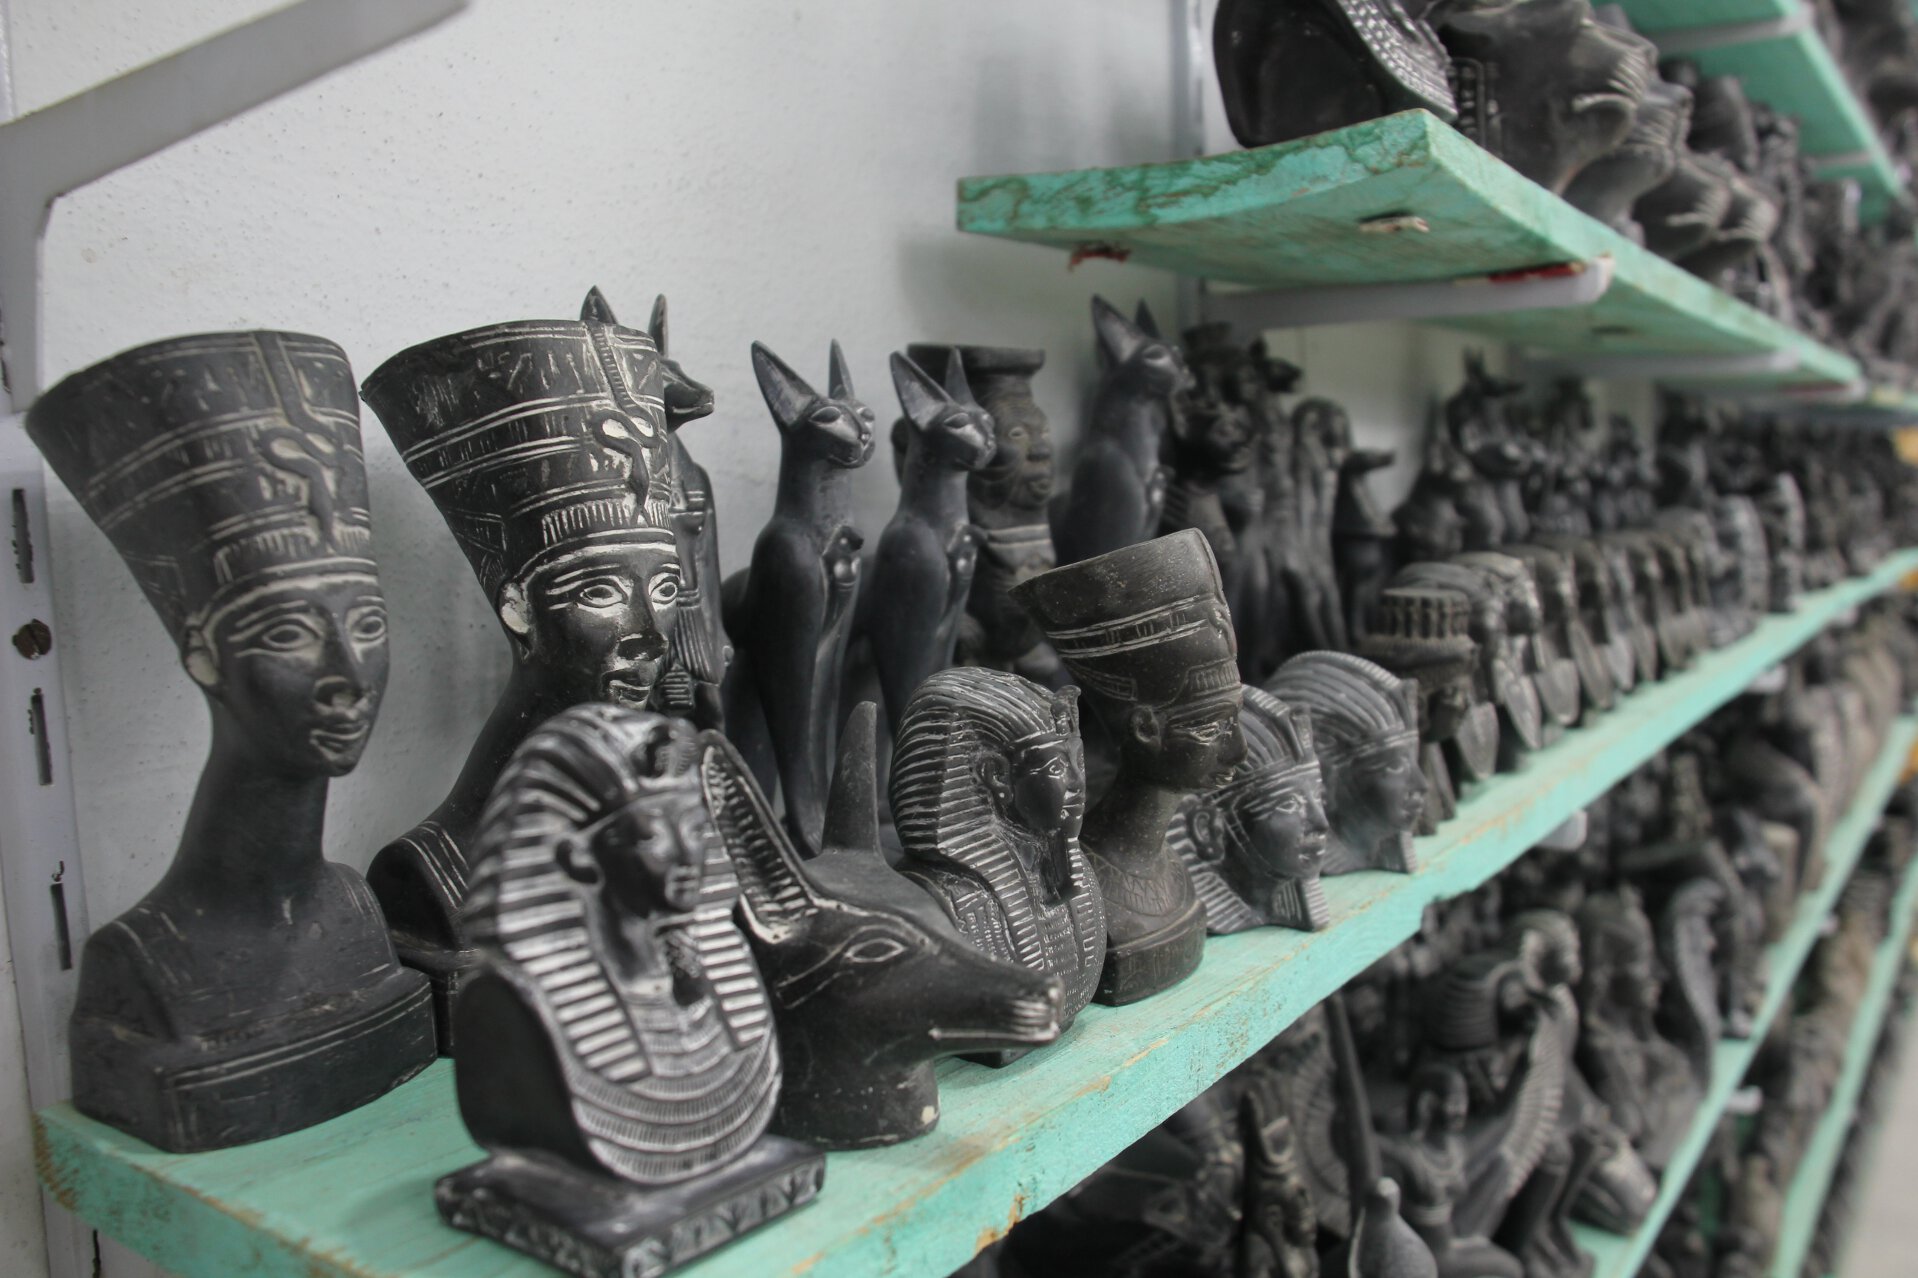 Onyx souvenirs sit on a shelf in an Egyptian gift shop.